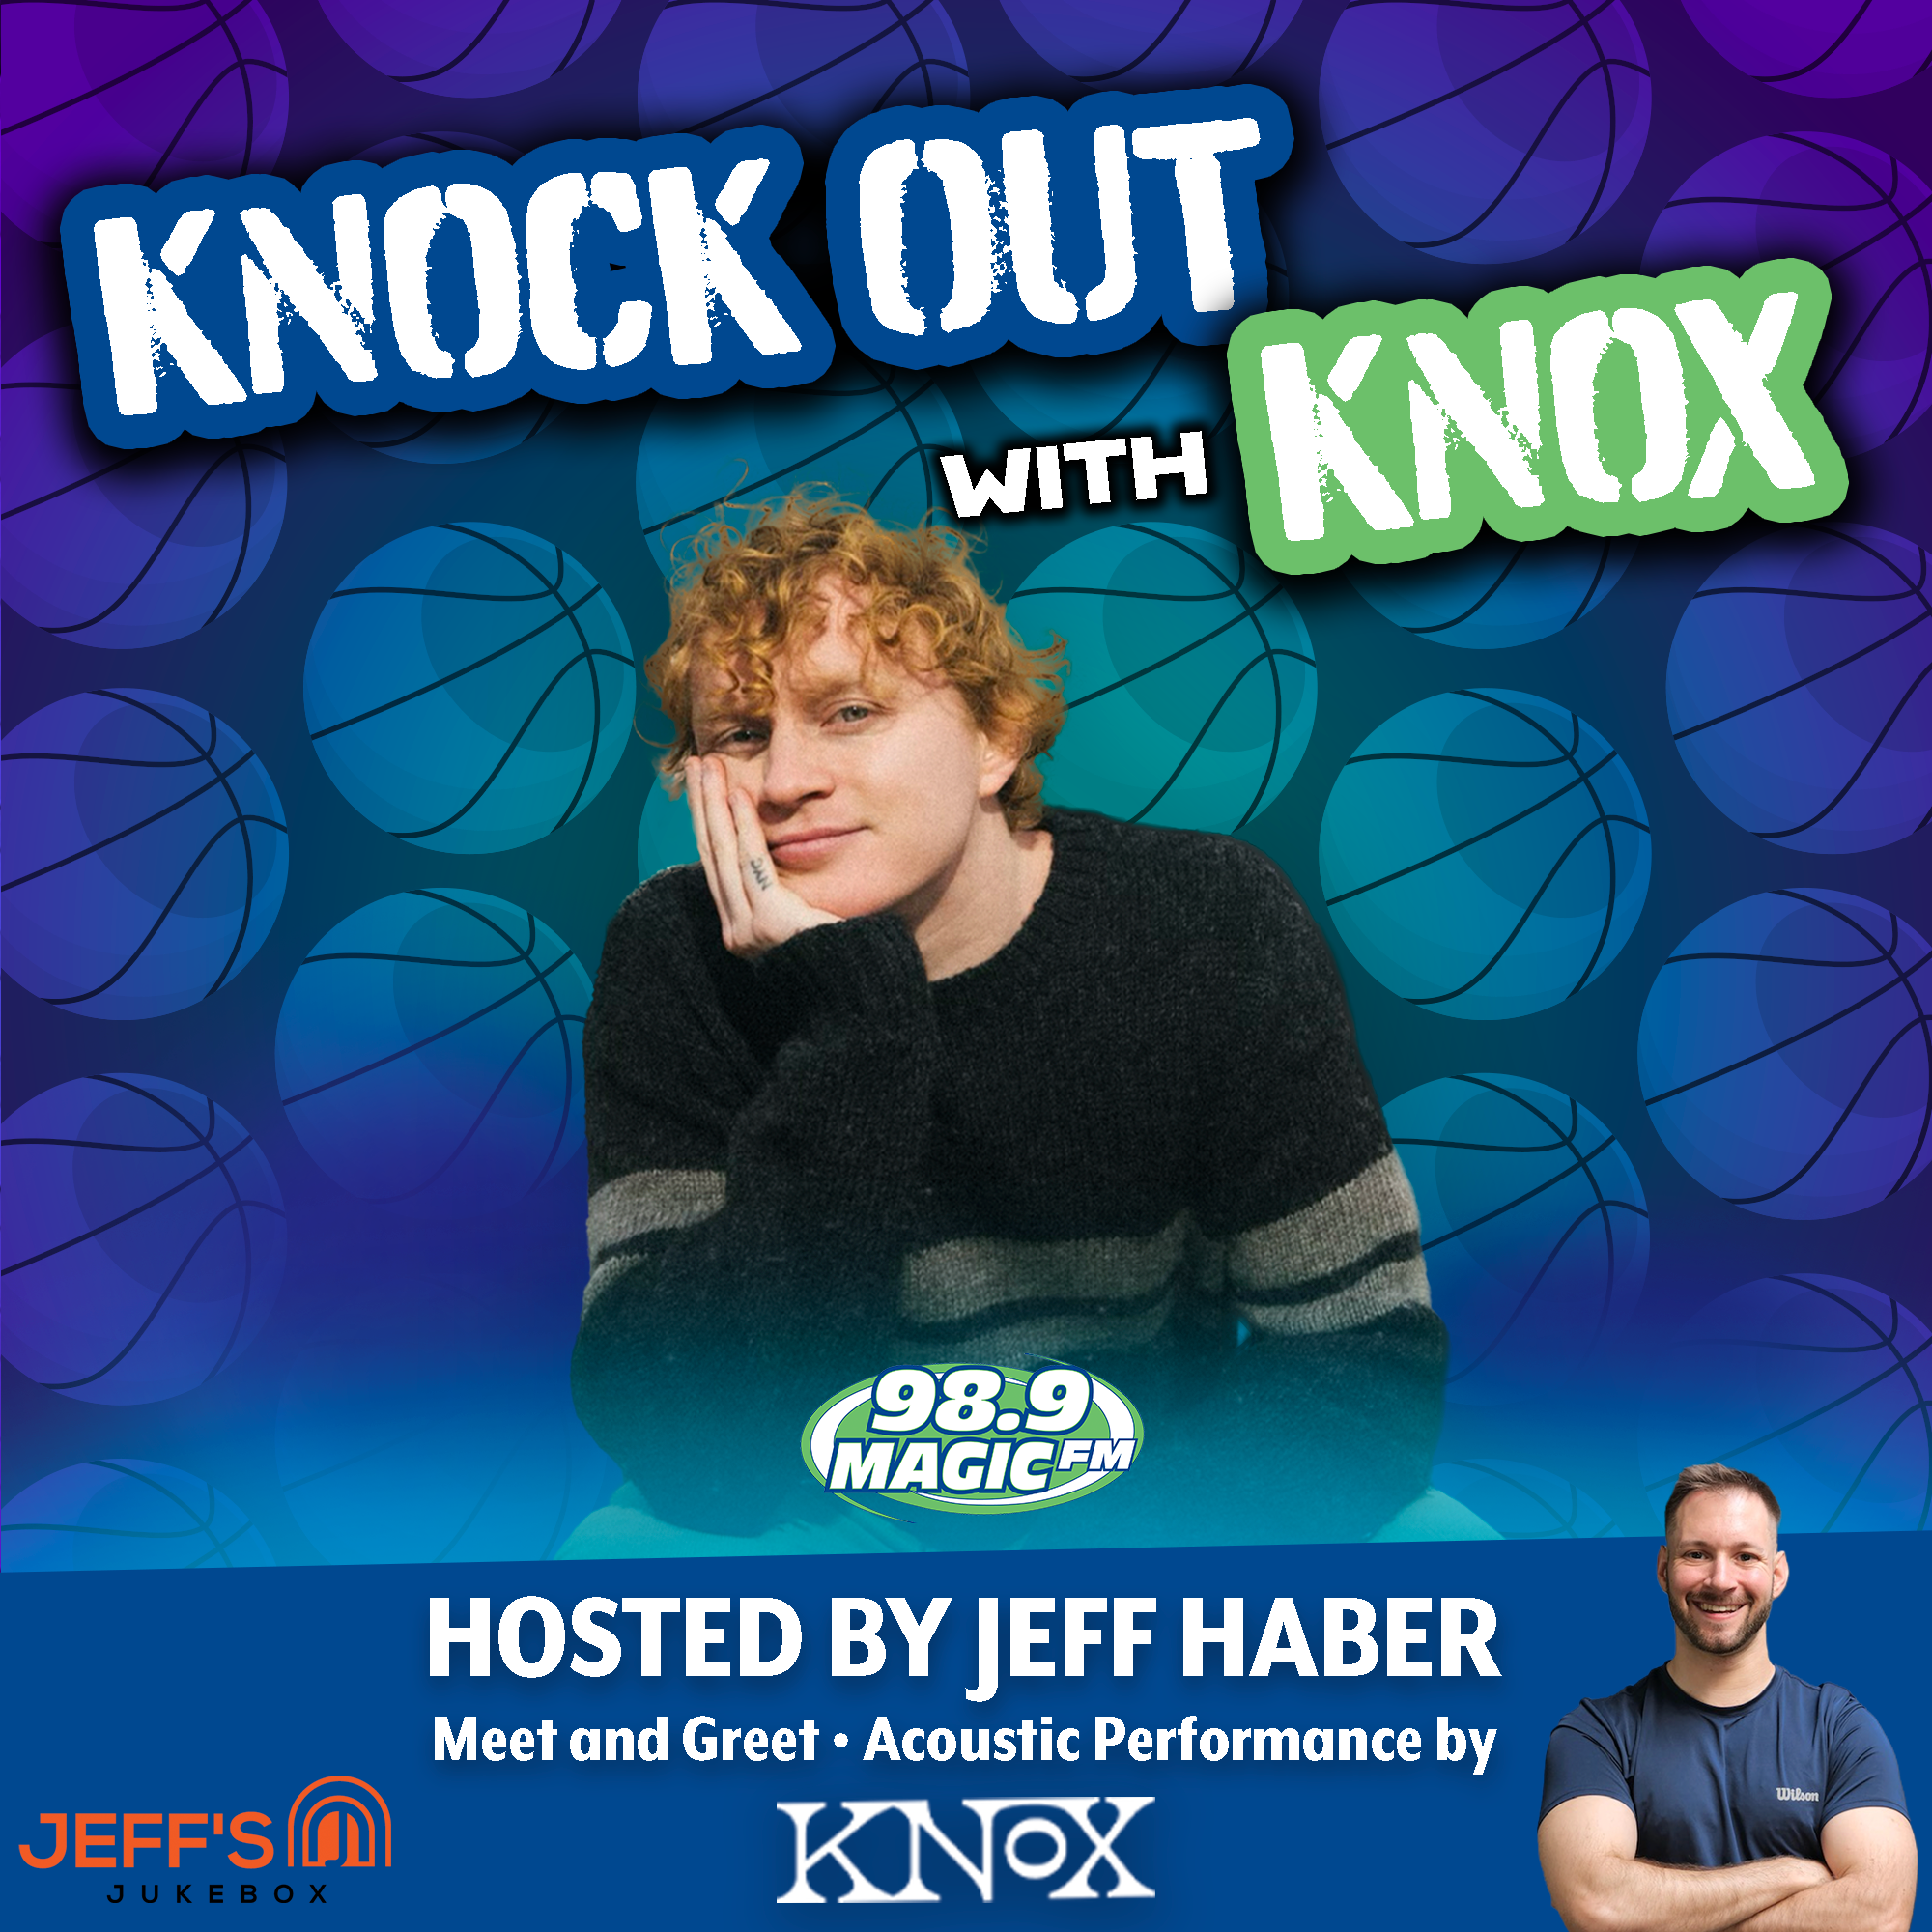 Knockout With Knox